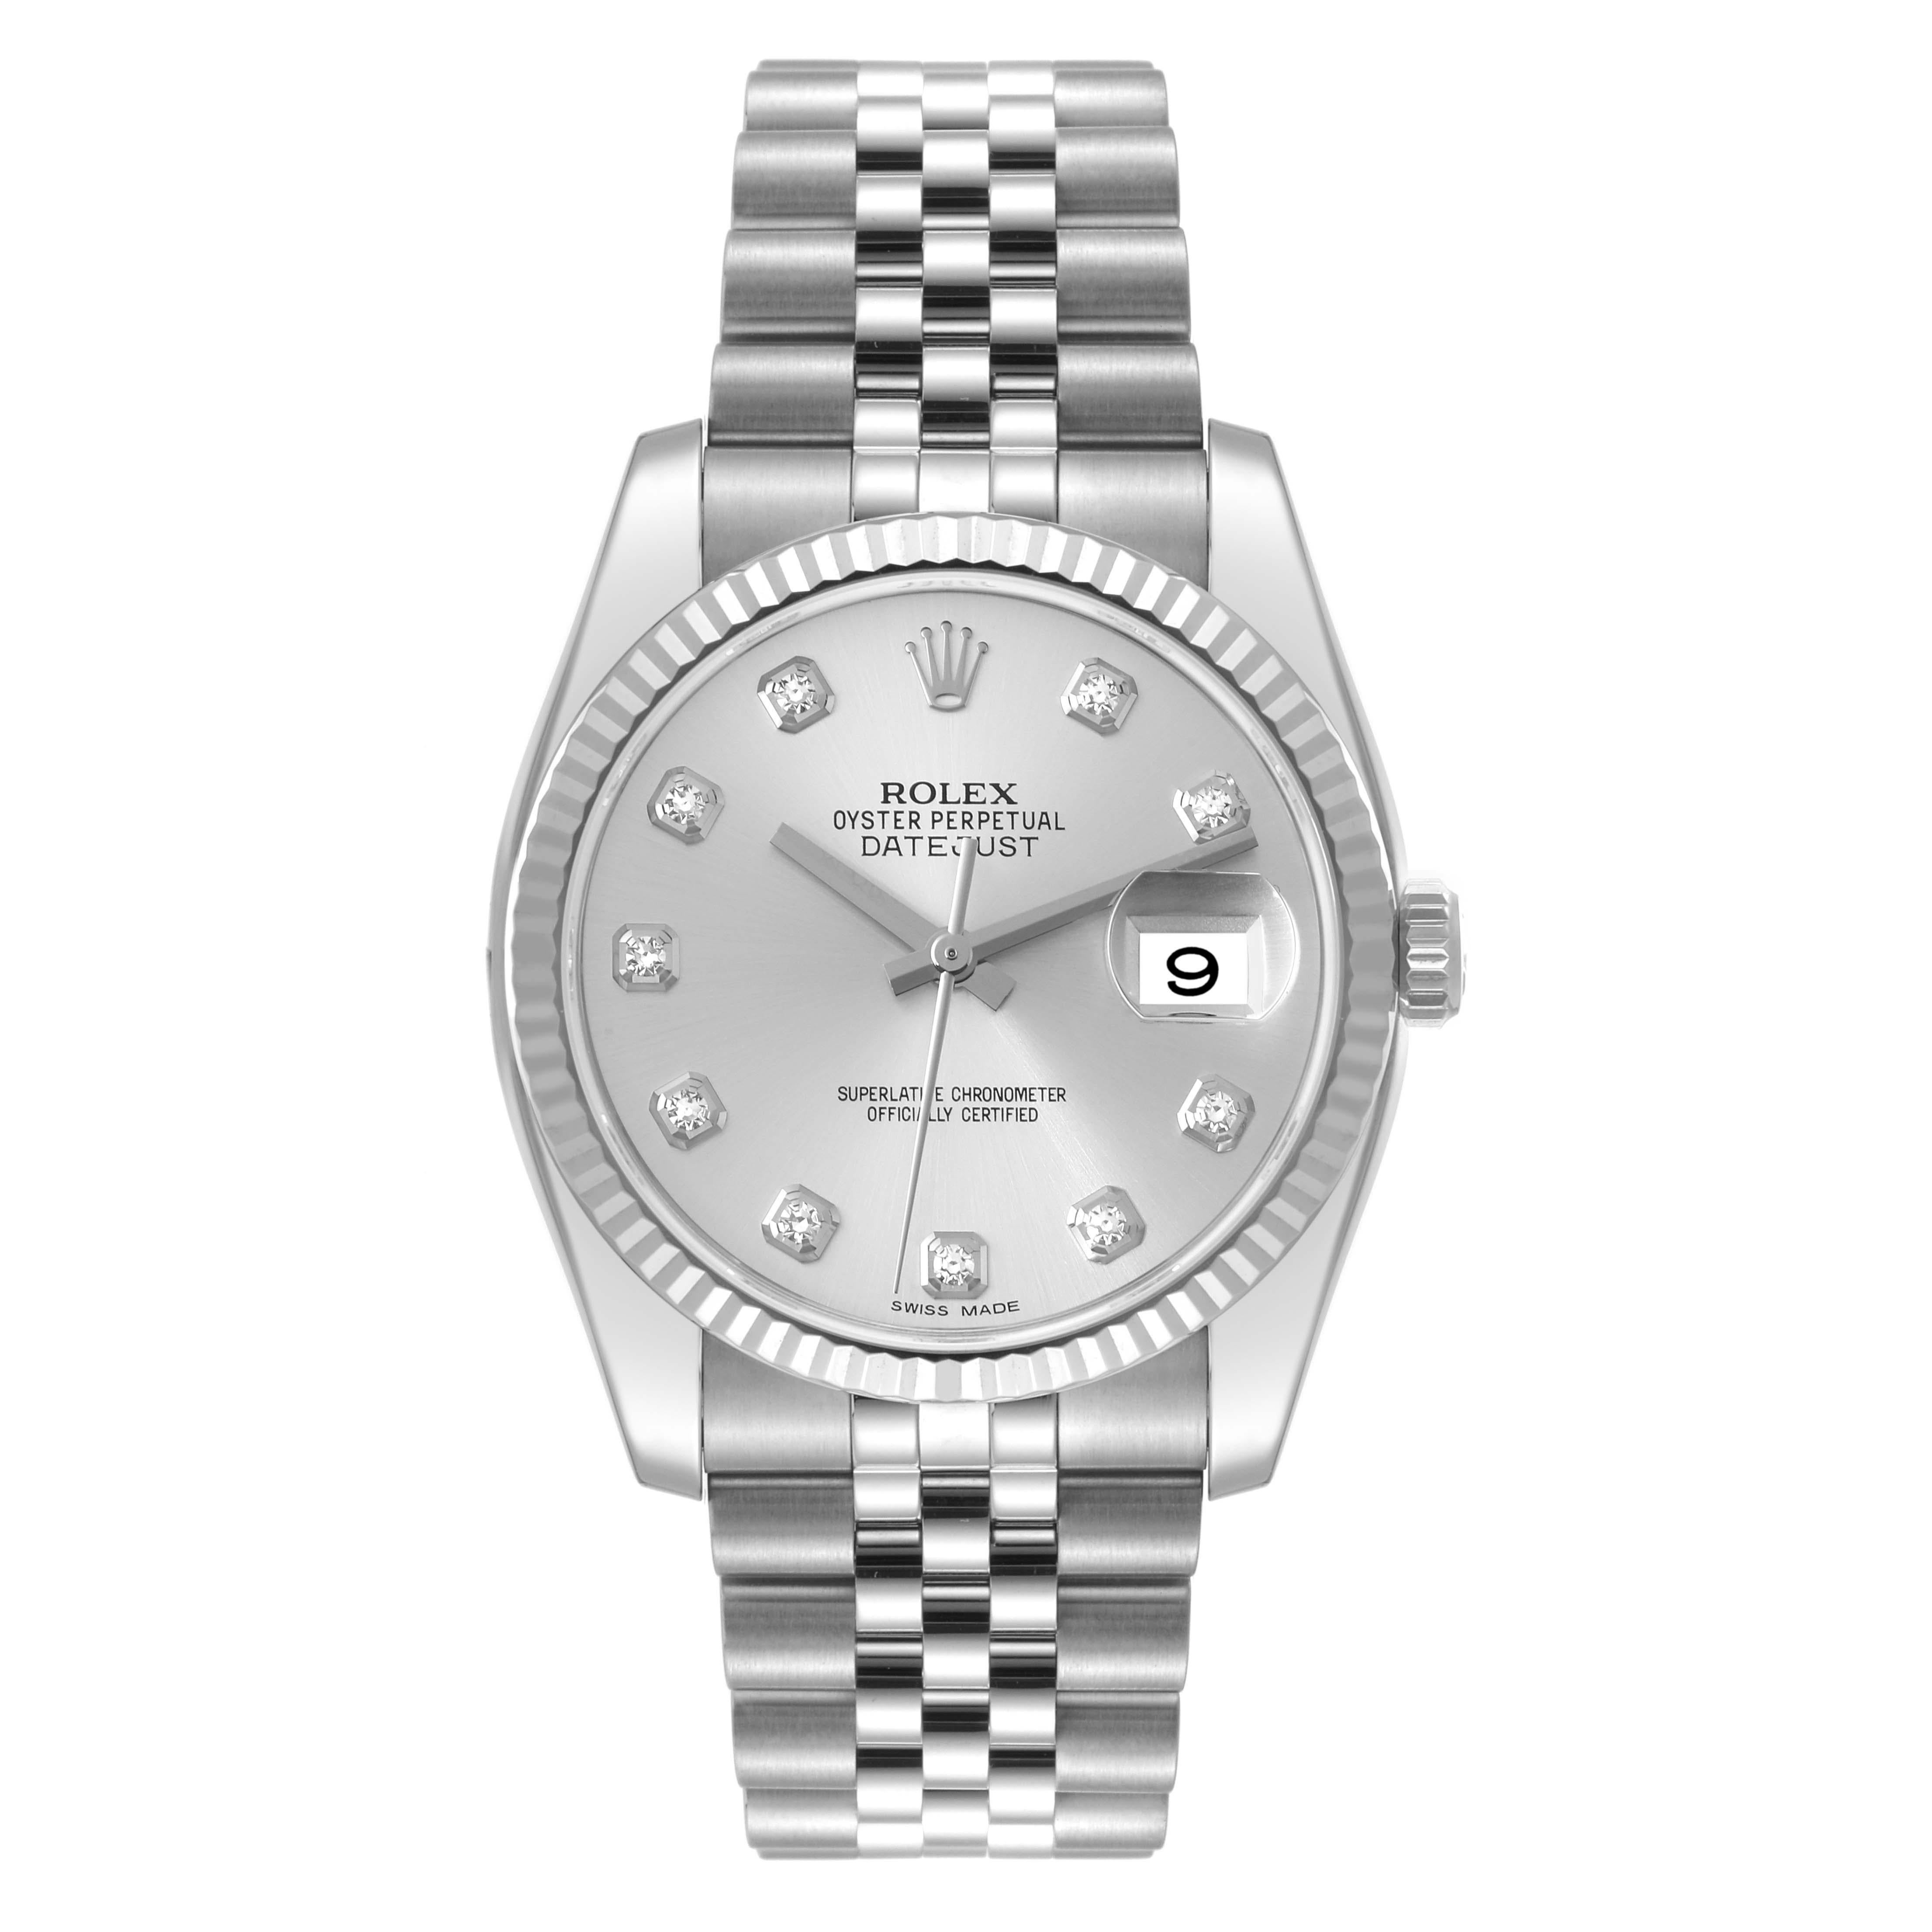 Rolex Datejust Steel White Gold Silver Diamond Dial Mens Watch 116234. Officially certified chronometer automatic self-winding movement. Stainless steel case 36.0 mm in diameter. Rolex logo on the crown. 18K white gold fluted bezel. Scratch